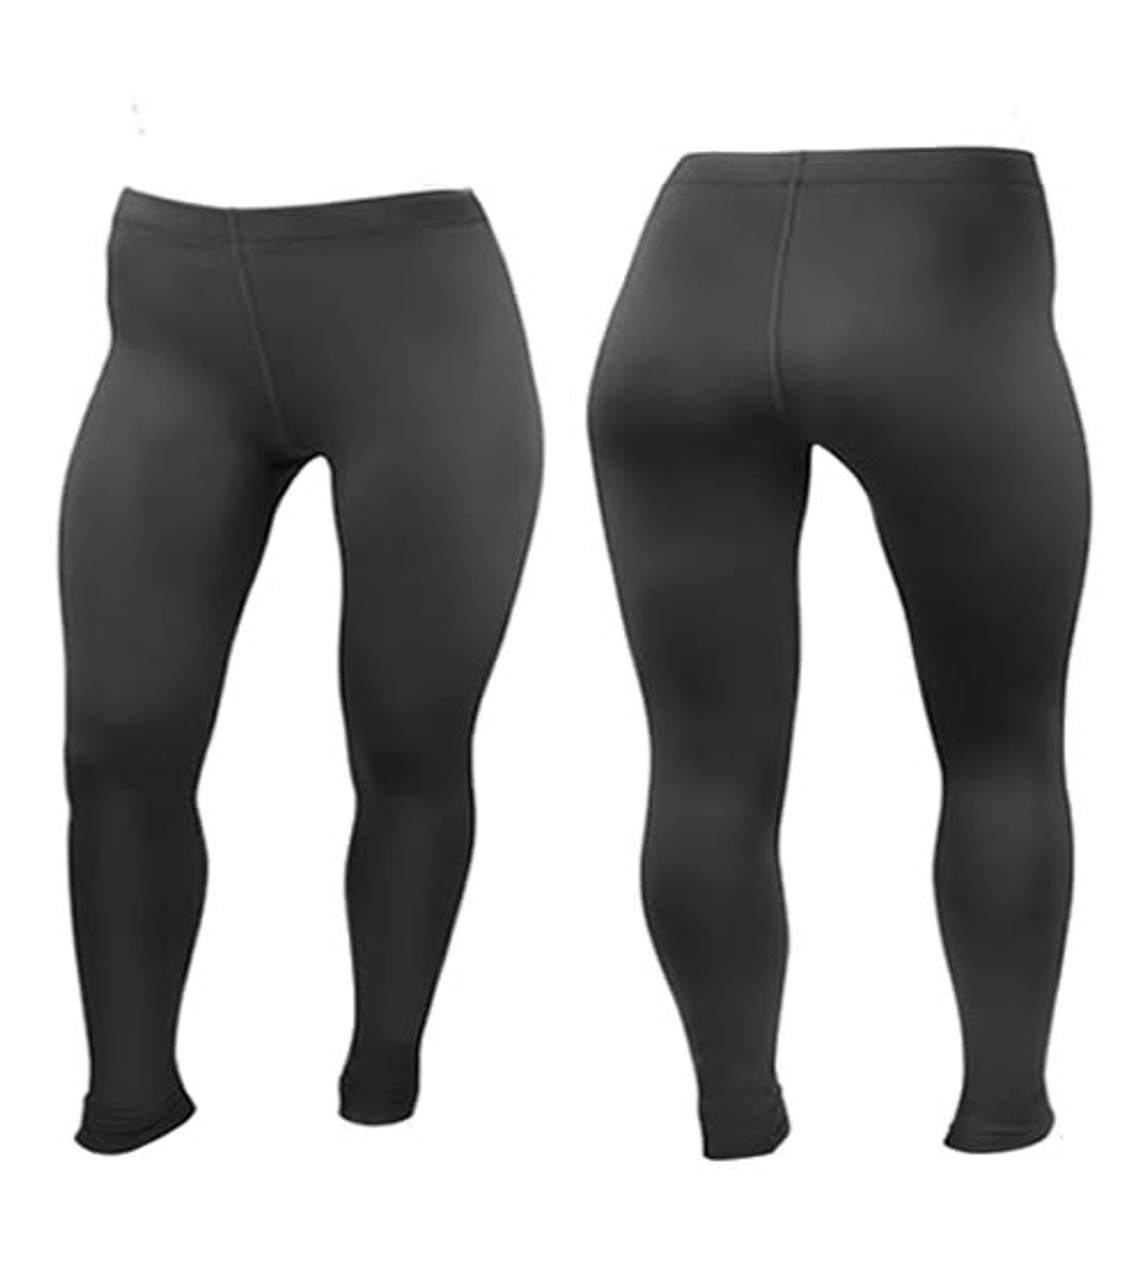 ATD Full Figure Stretch Fleece Legging Tights - Mid Weight 30 - 65 degrees